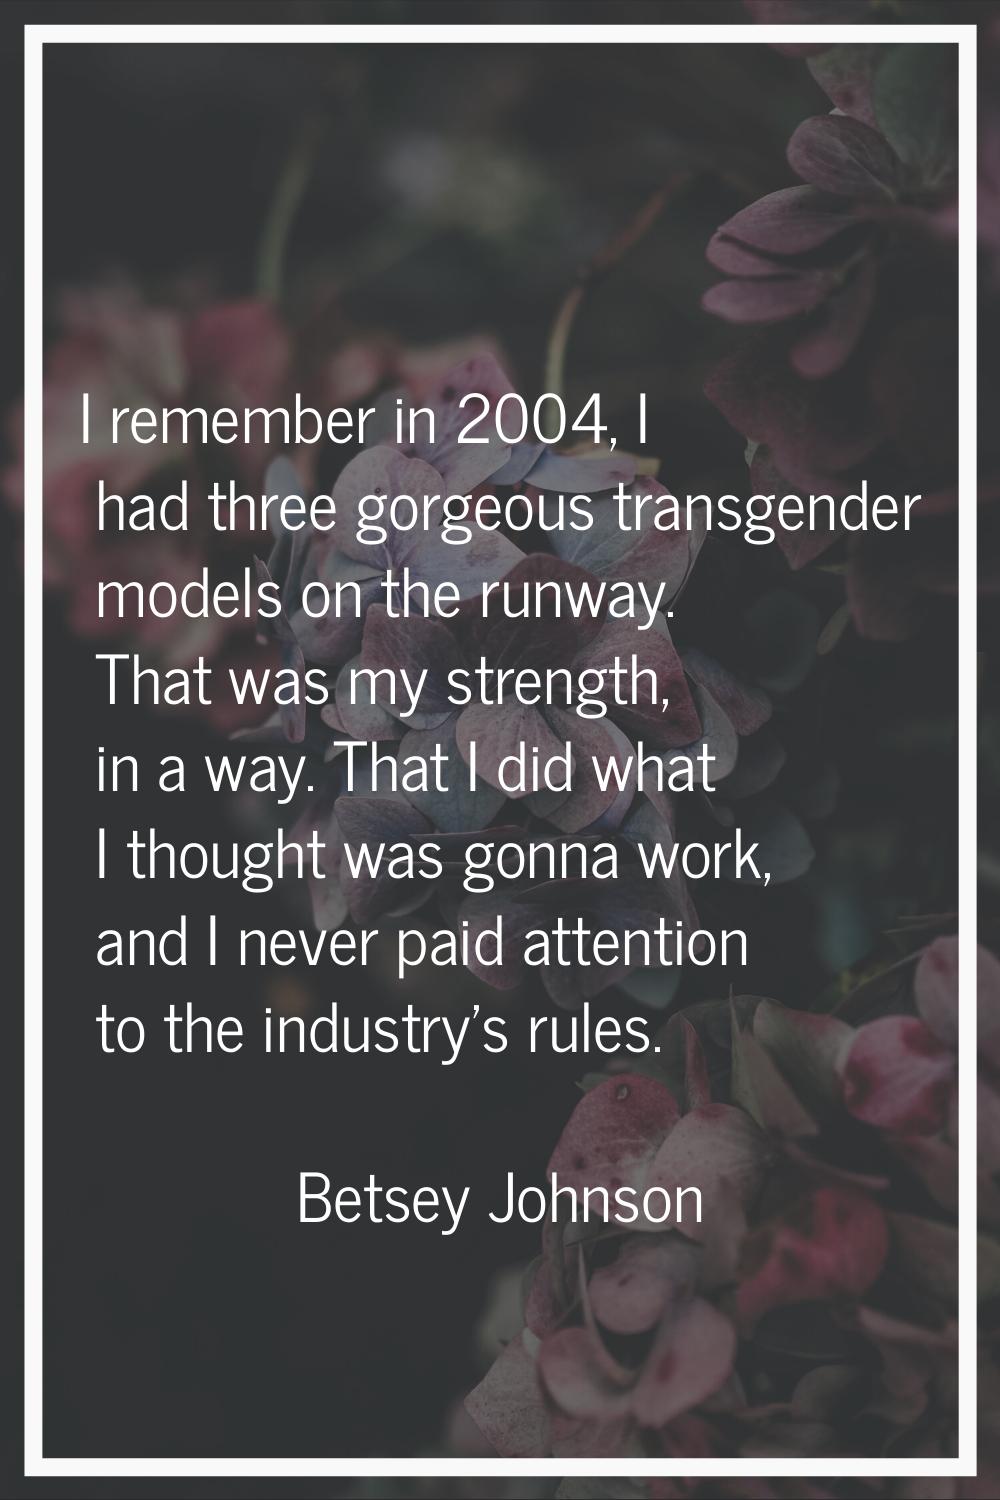 I remember in 2004, I had three gorgeous transgender models on the runway. That was my strength, in